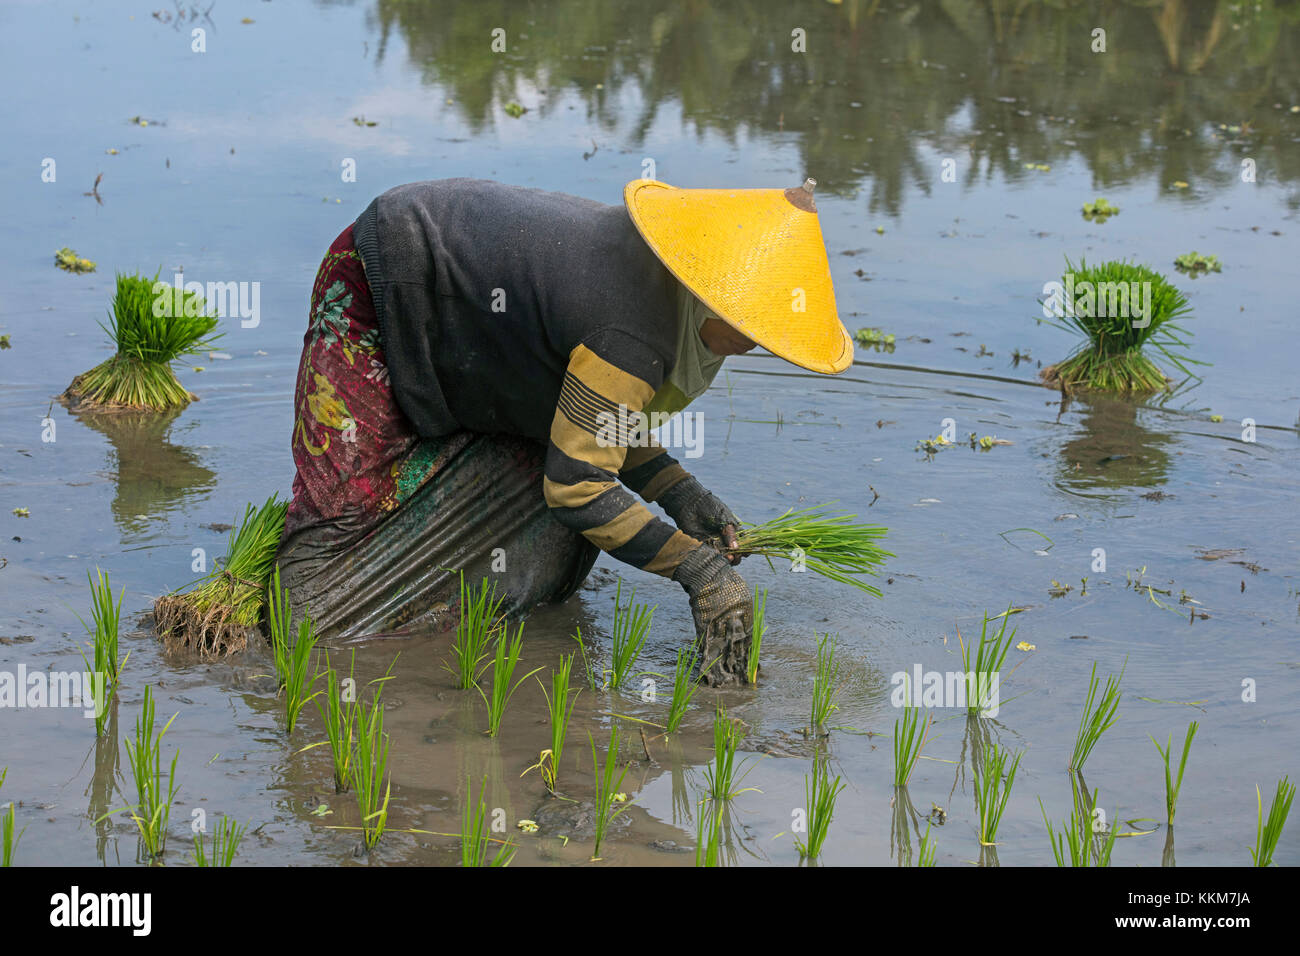 Indonesian woman with traditional conical hat / caping planting rice in paddy field on the island Lombok, Indonesia Stock Photo